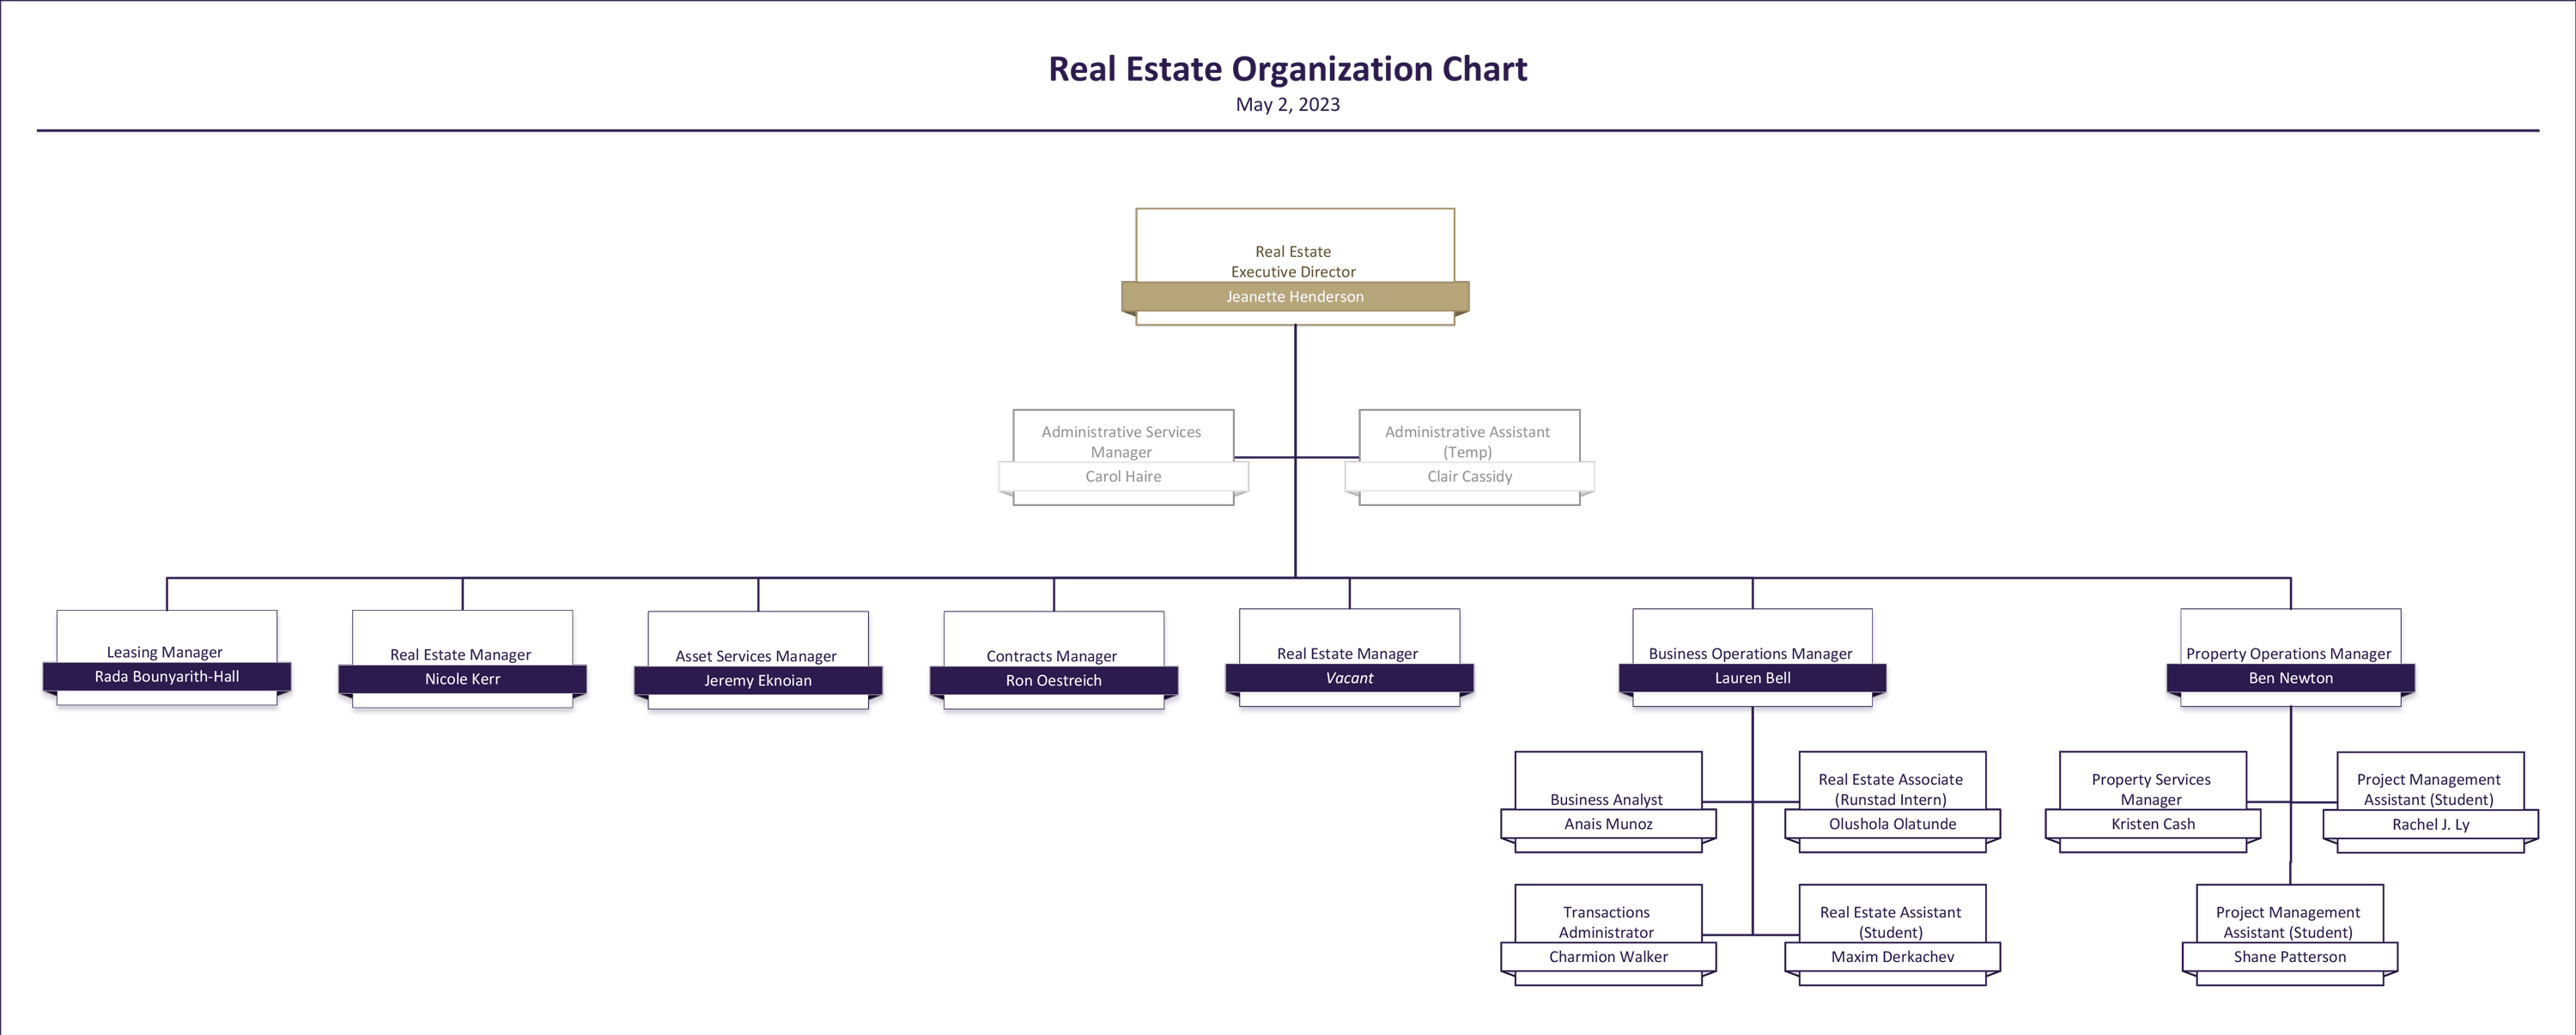 Organization chart for Real Estate